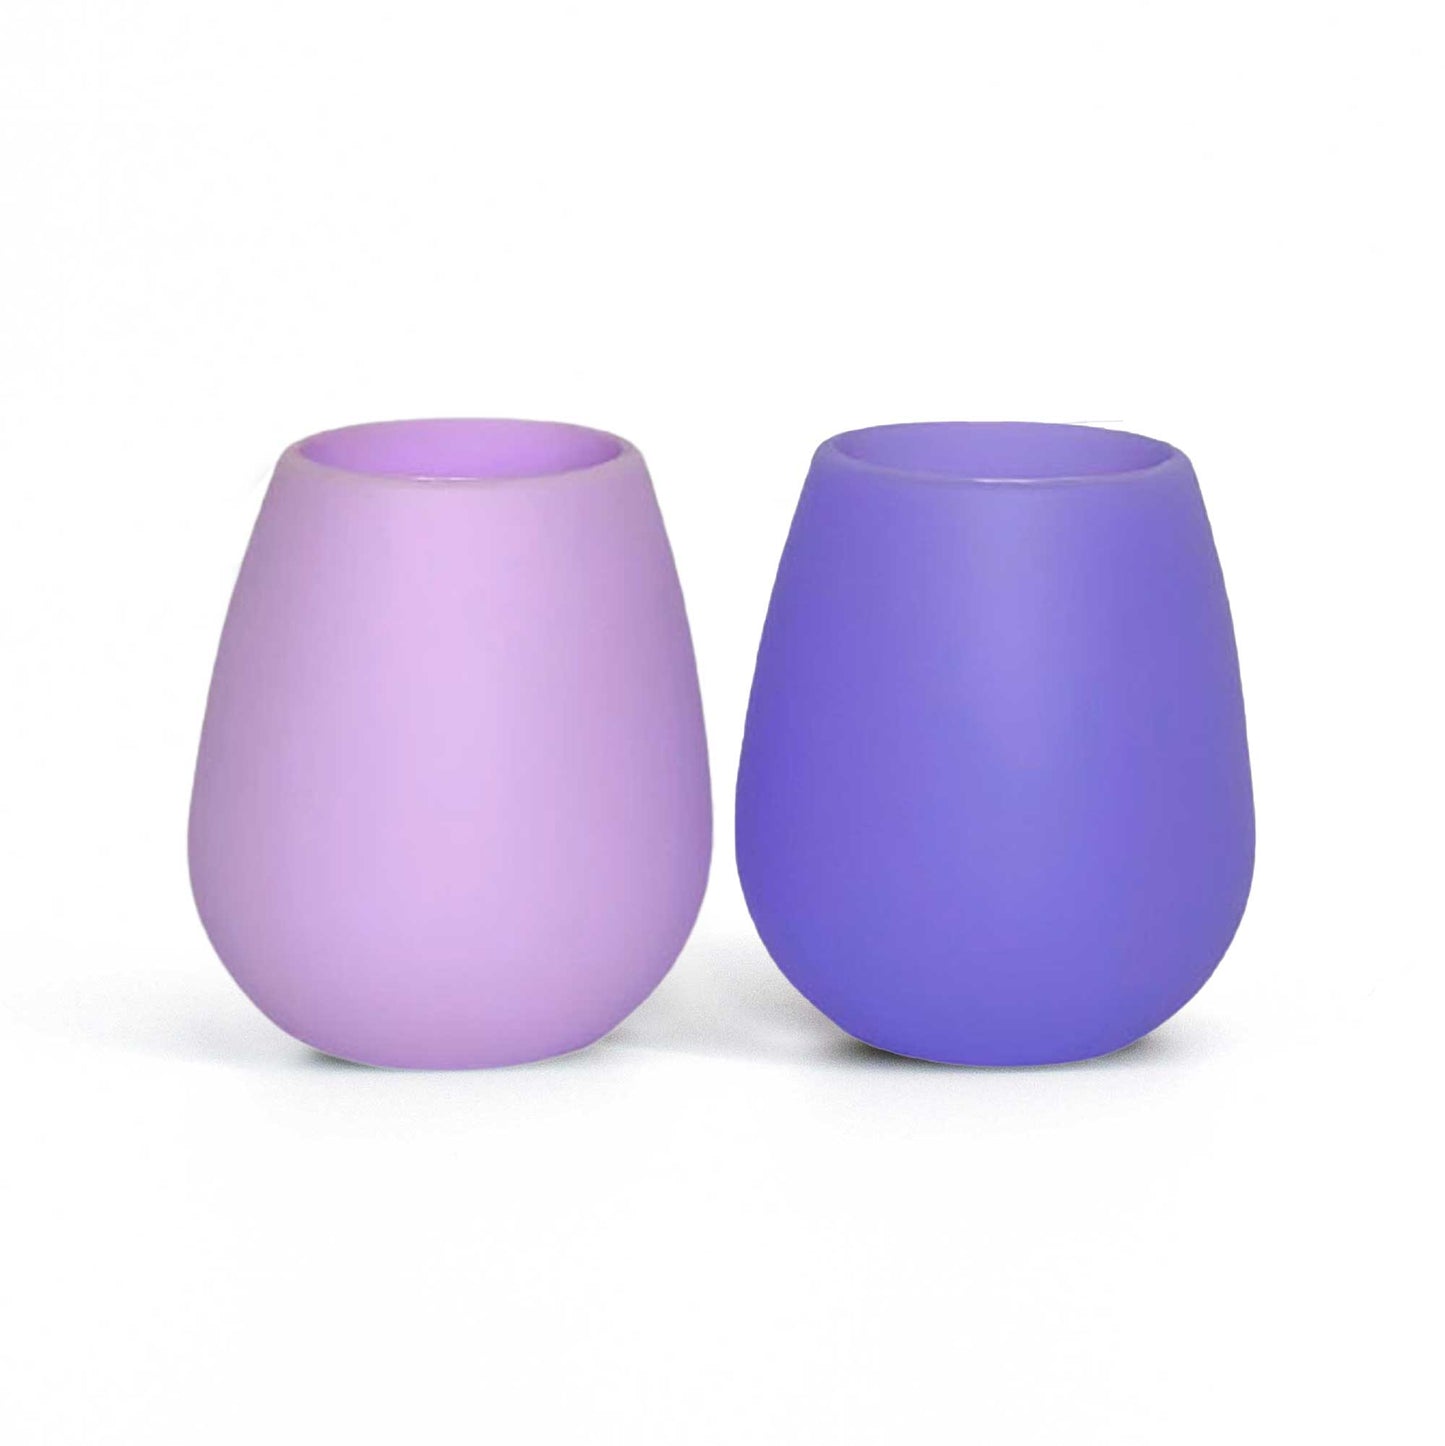 Set of two wine glasses made from food-grade silicone